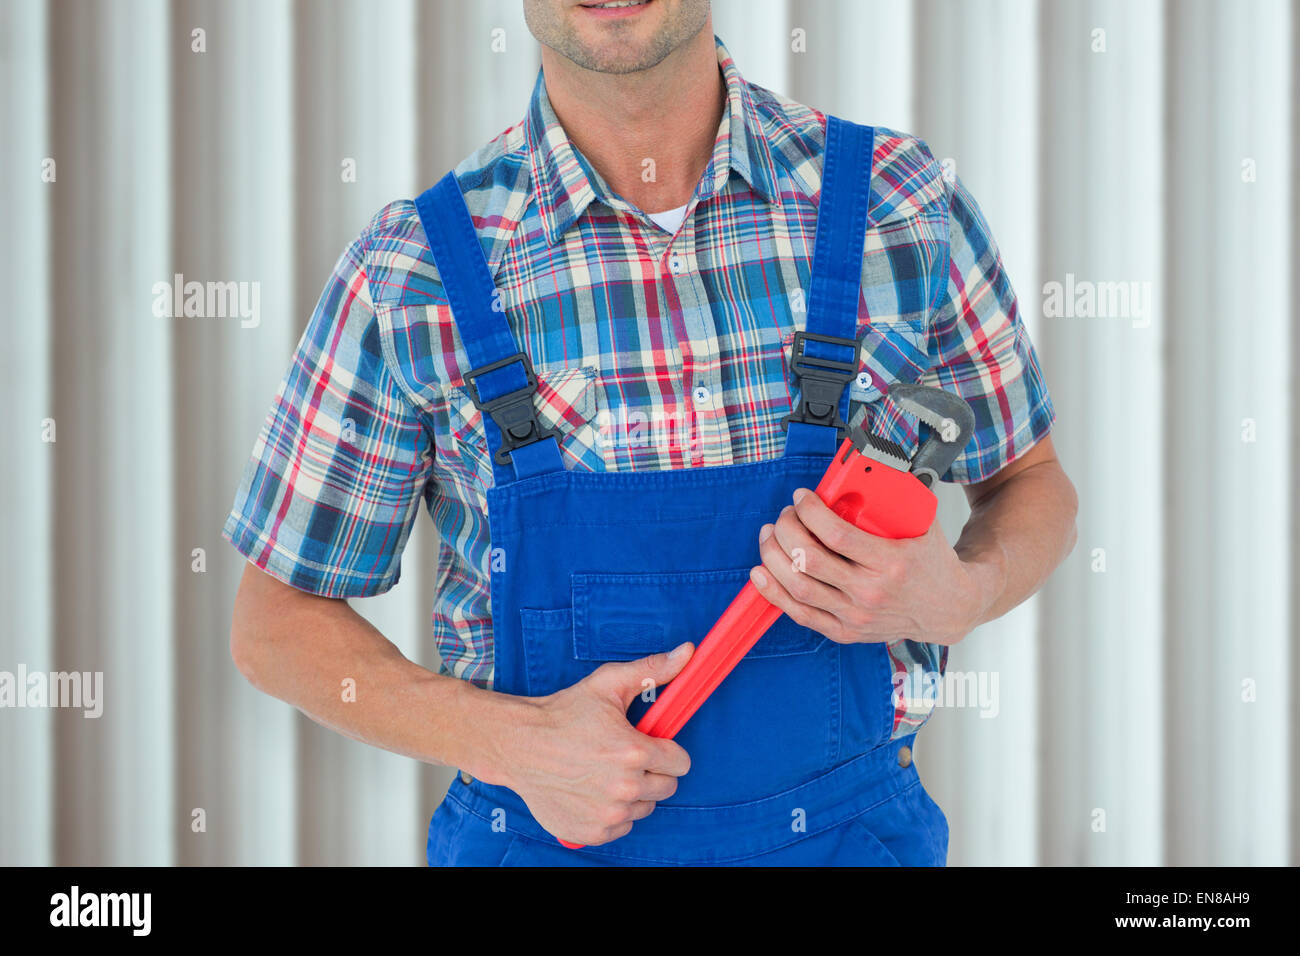 Composite image of cropped image of plumber holding monkey wrench Stock Photo